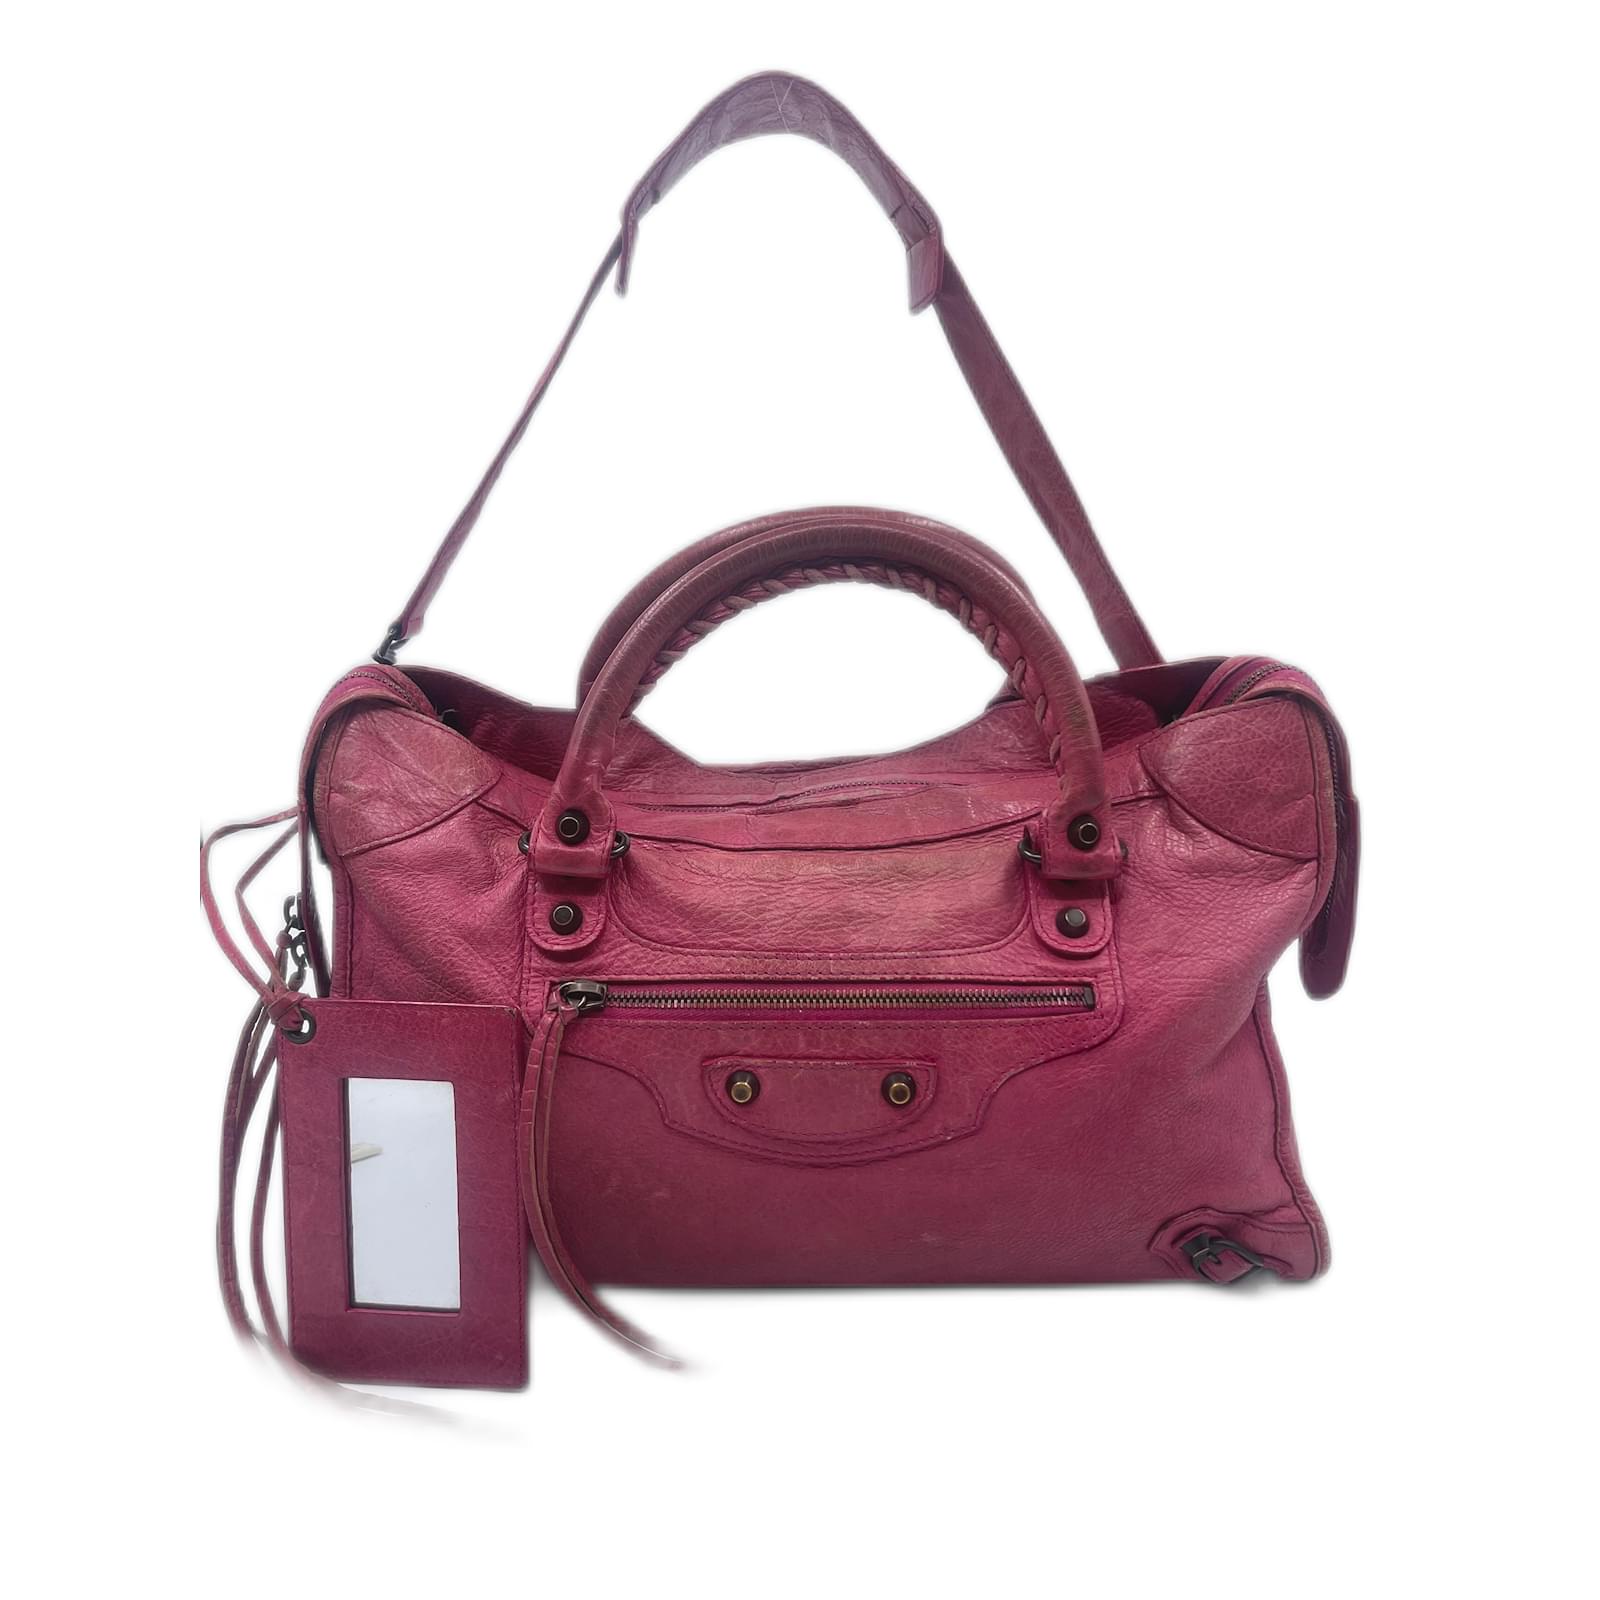 Balenciaga Pink Bag Satchel Style with Accessories on Sale